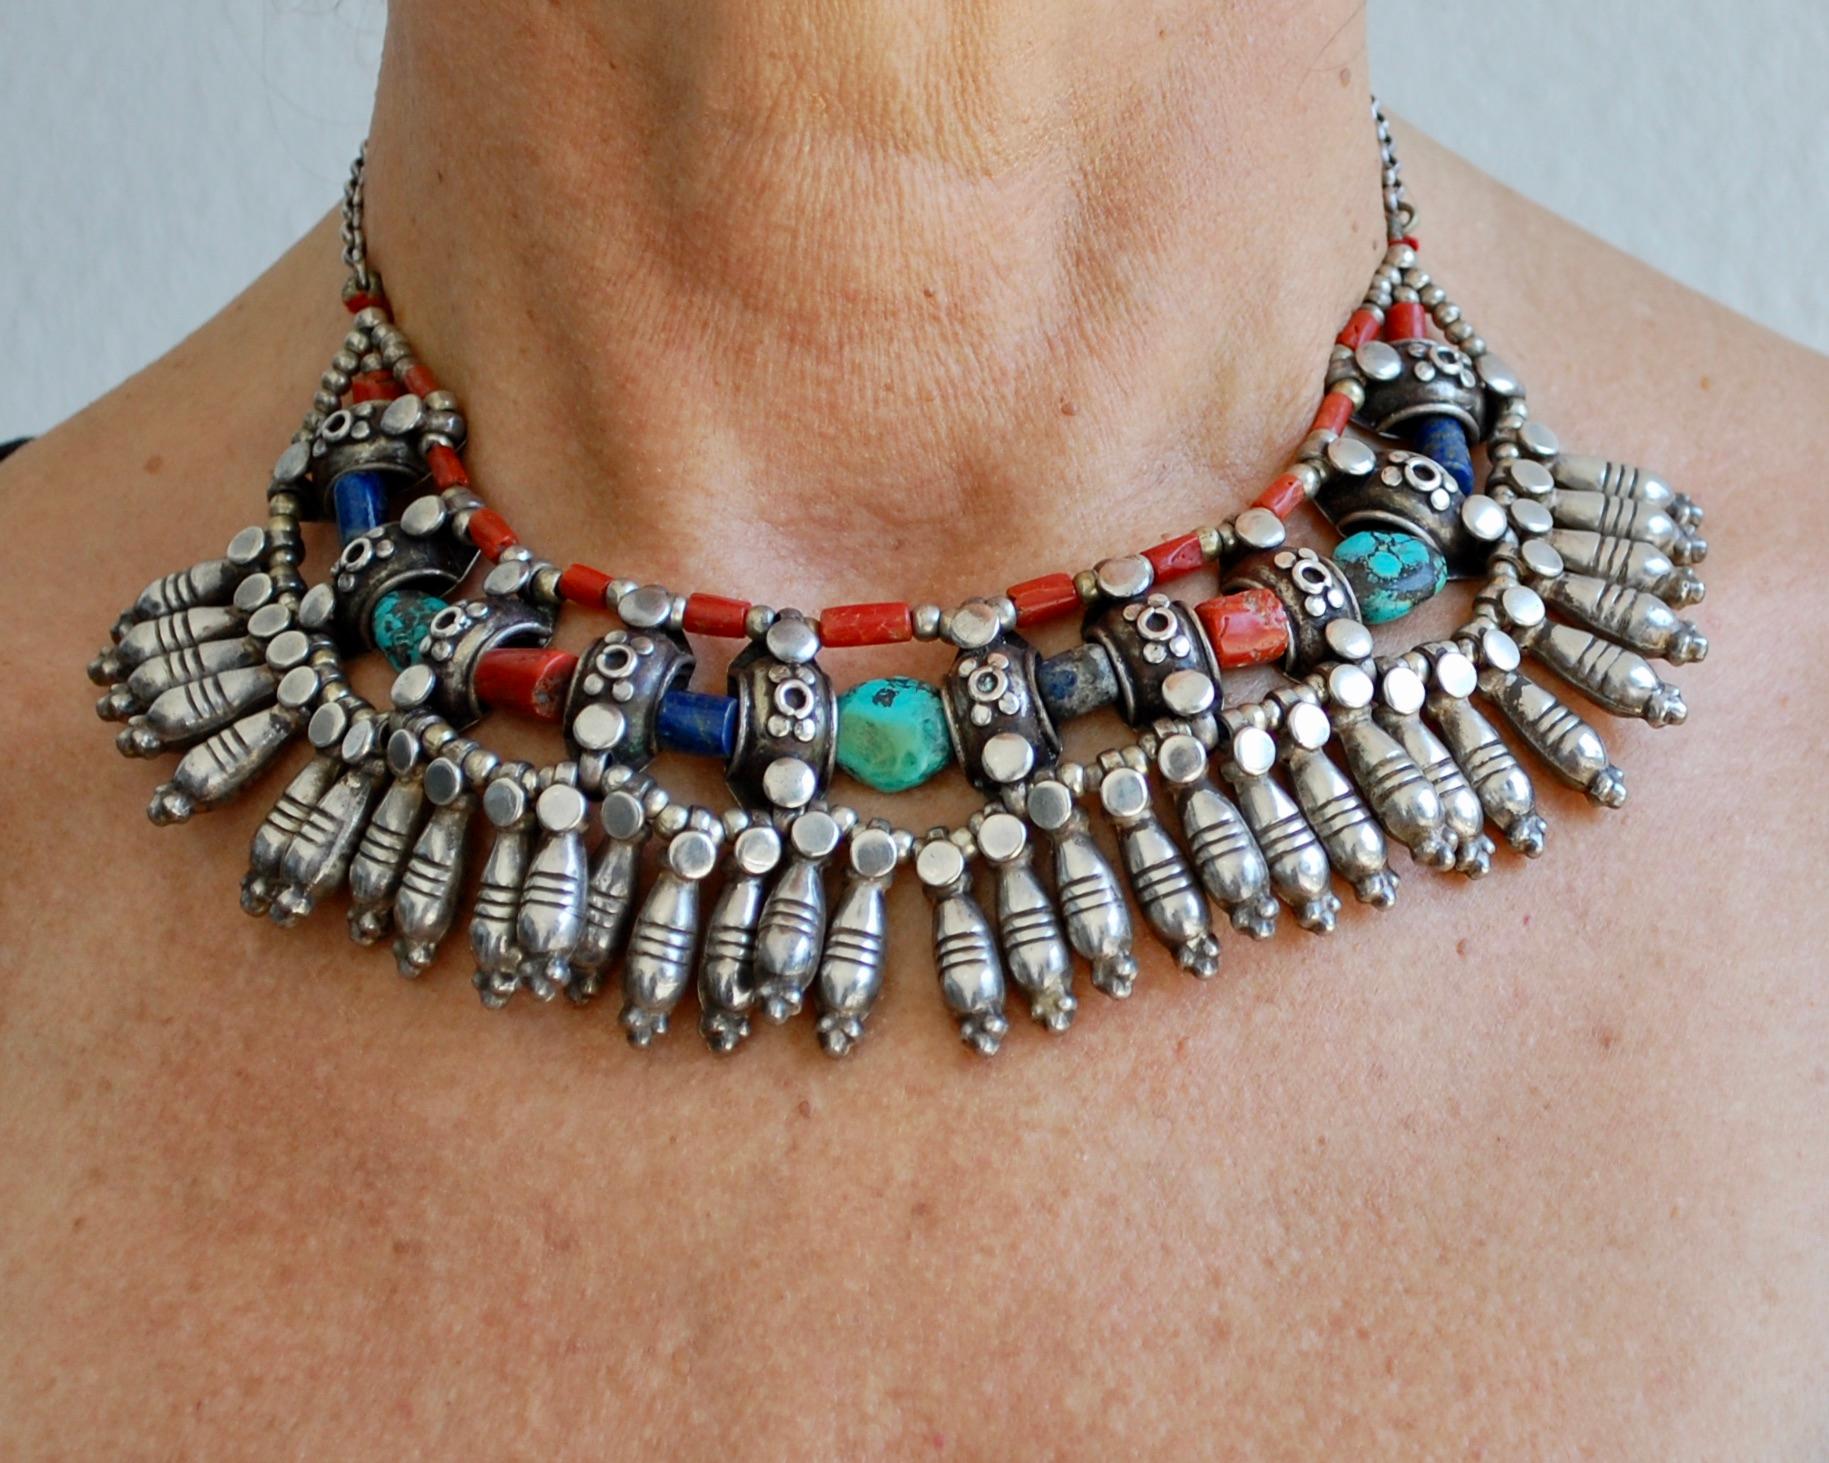 Antique hand crafted Tibetan Ceremonial Silver Collar decorated with natural raw turquoise, natural coral beads and lapis lazuli. About 156 grams, 16